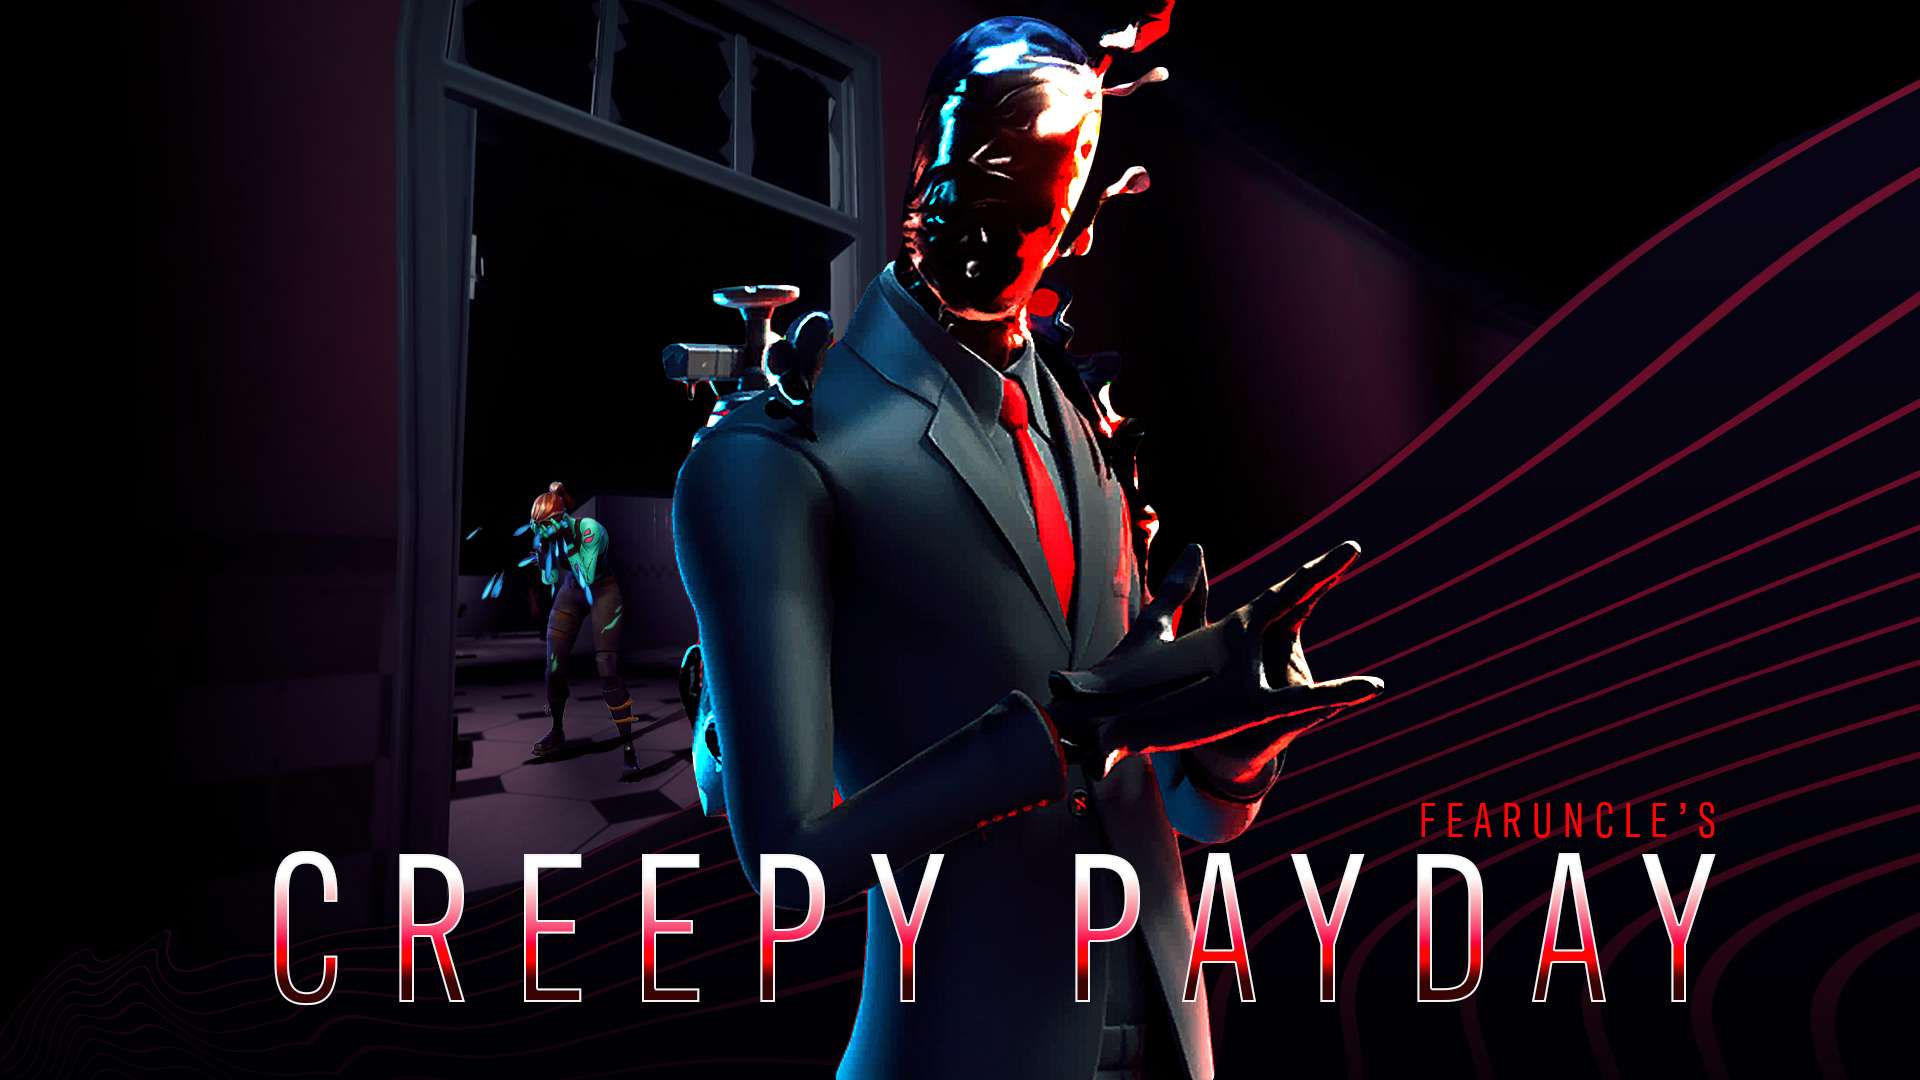 FEARUNCLE'S CREEPY PAYDAY